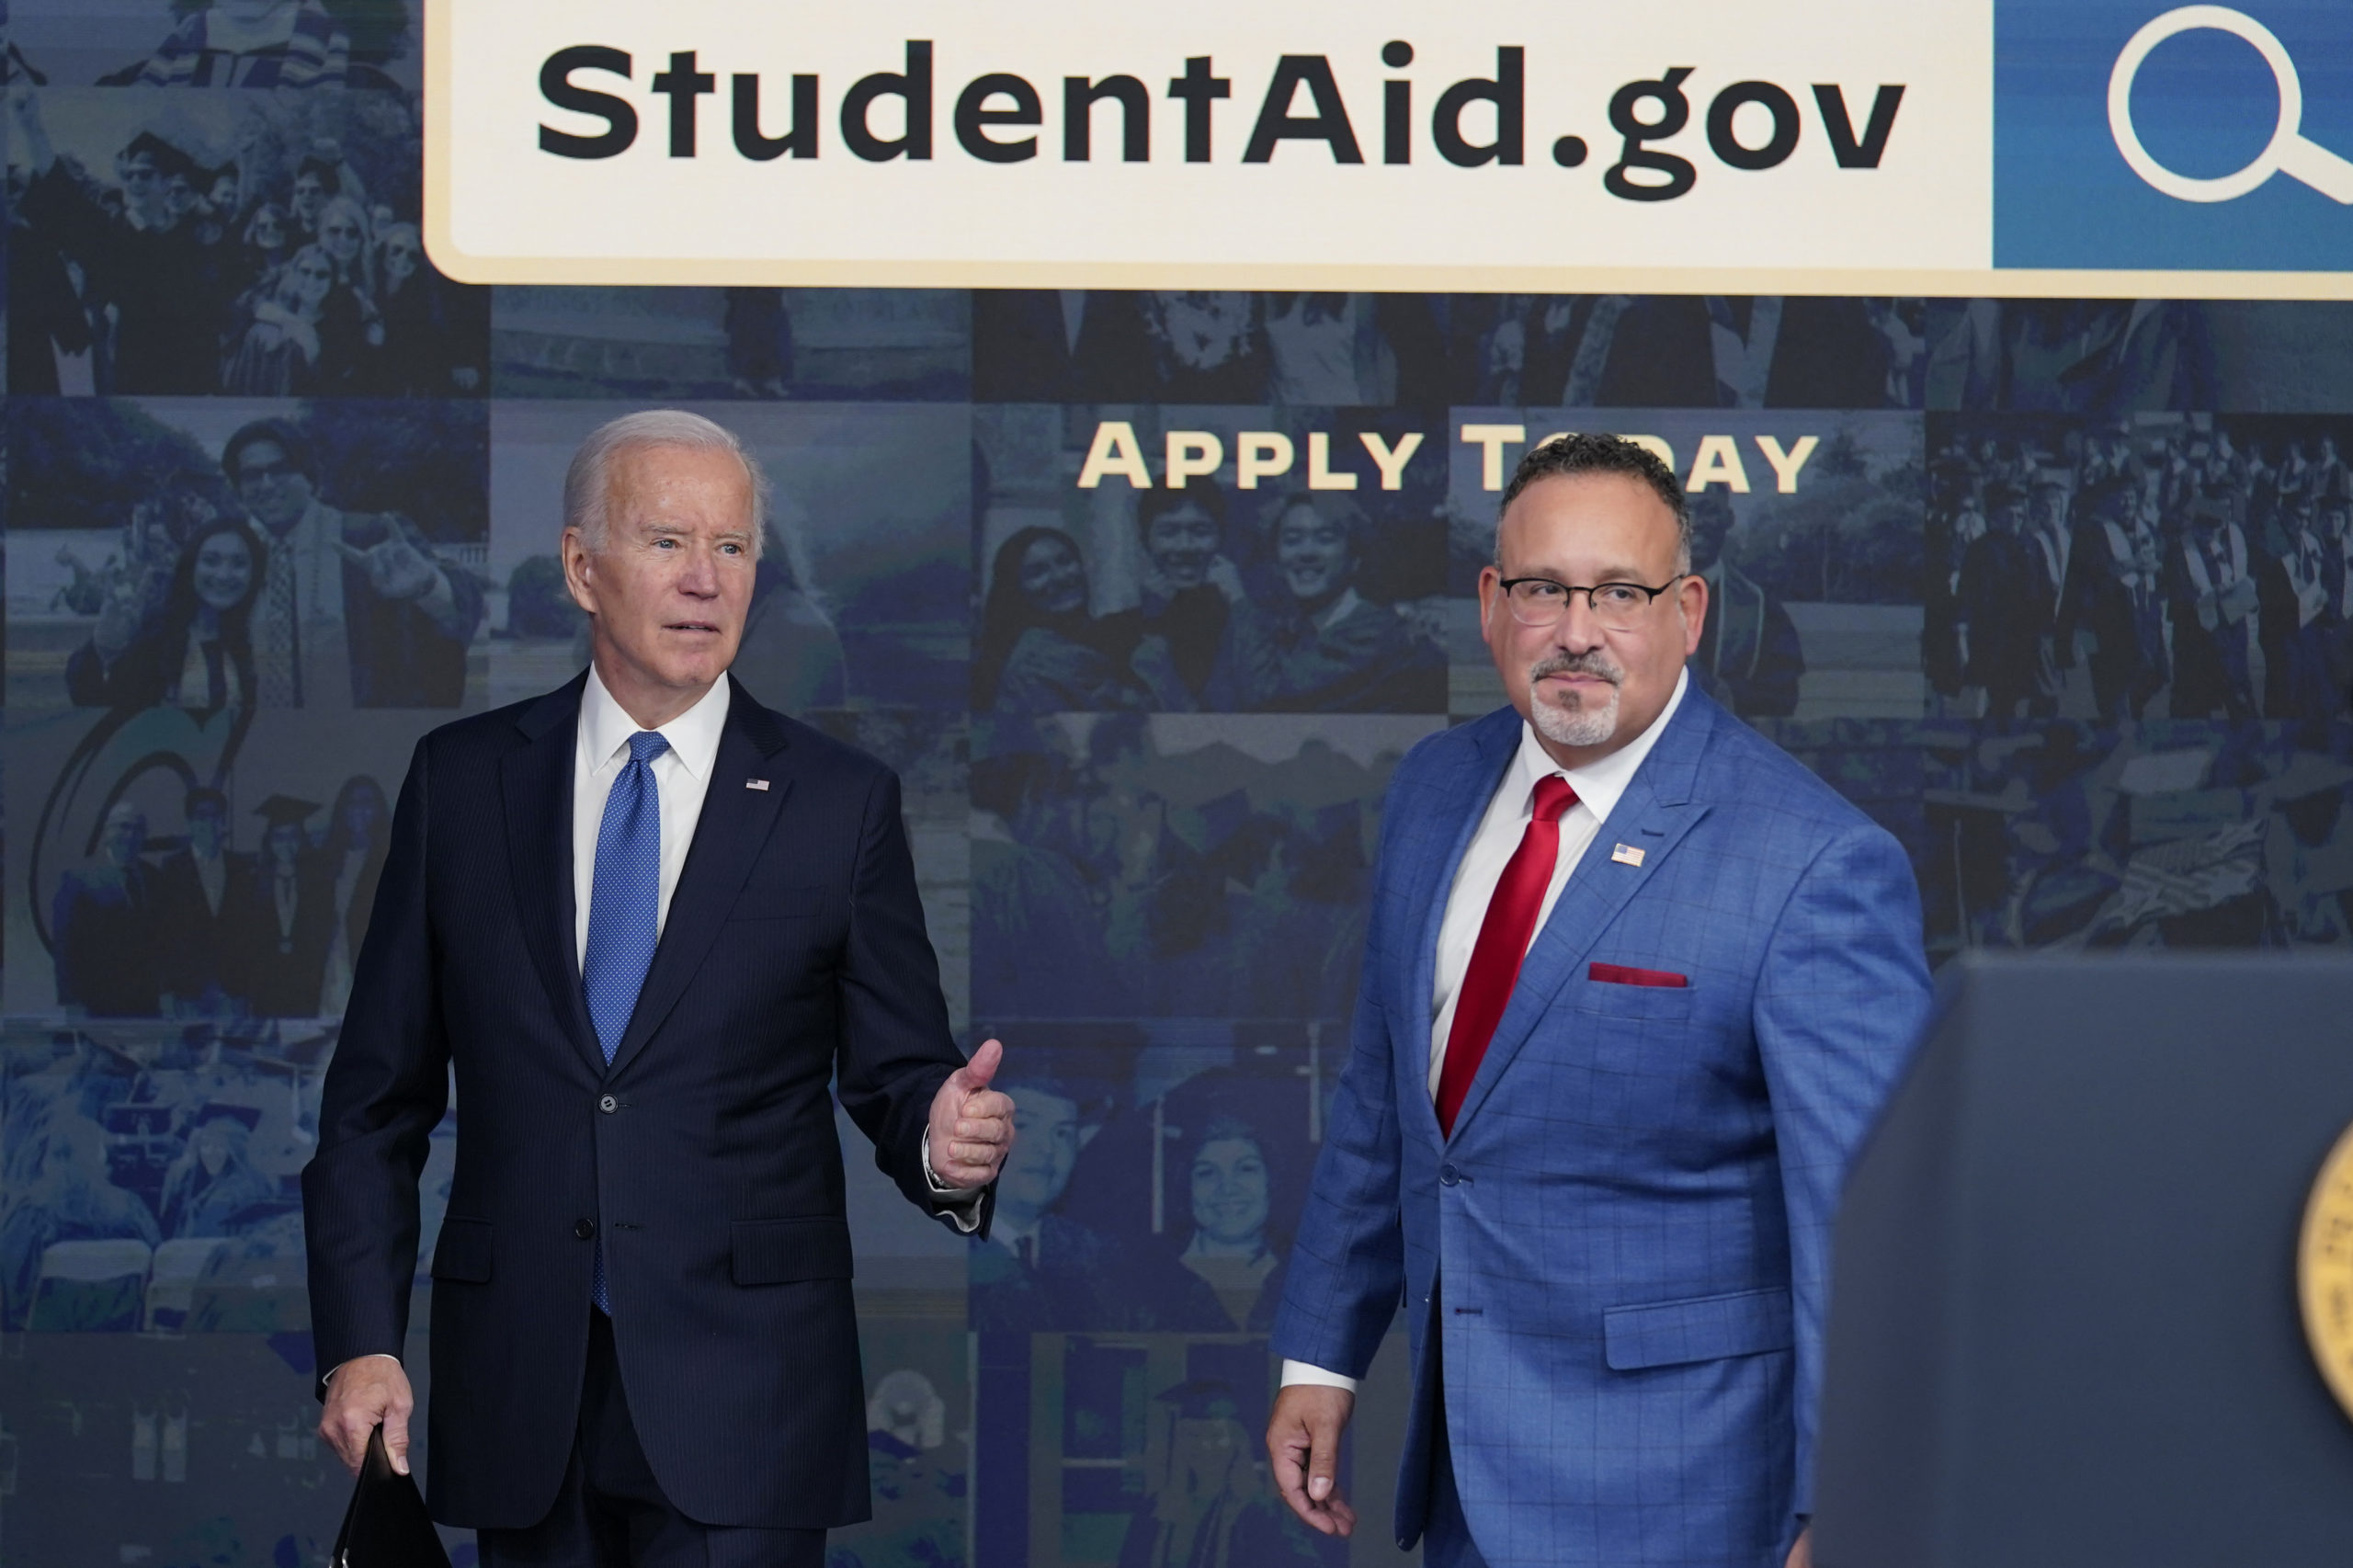 Black Borrowers Stand To Lose the Most if SCOTUS Blocks Biden Student Loan Relief Plan